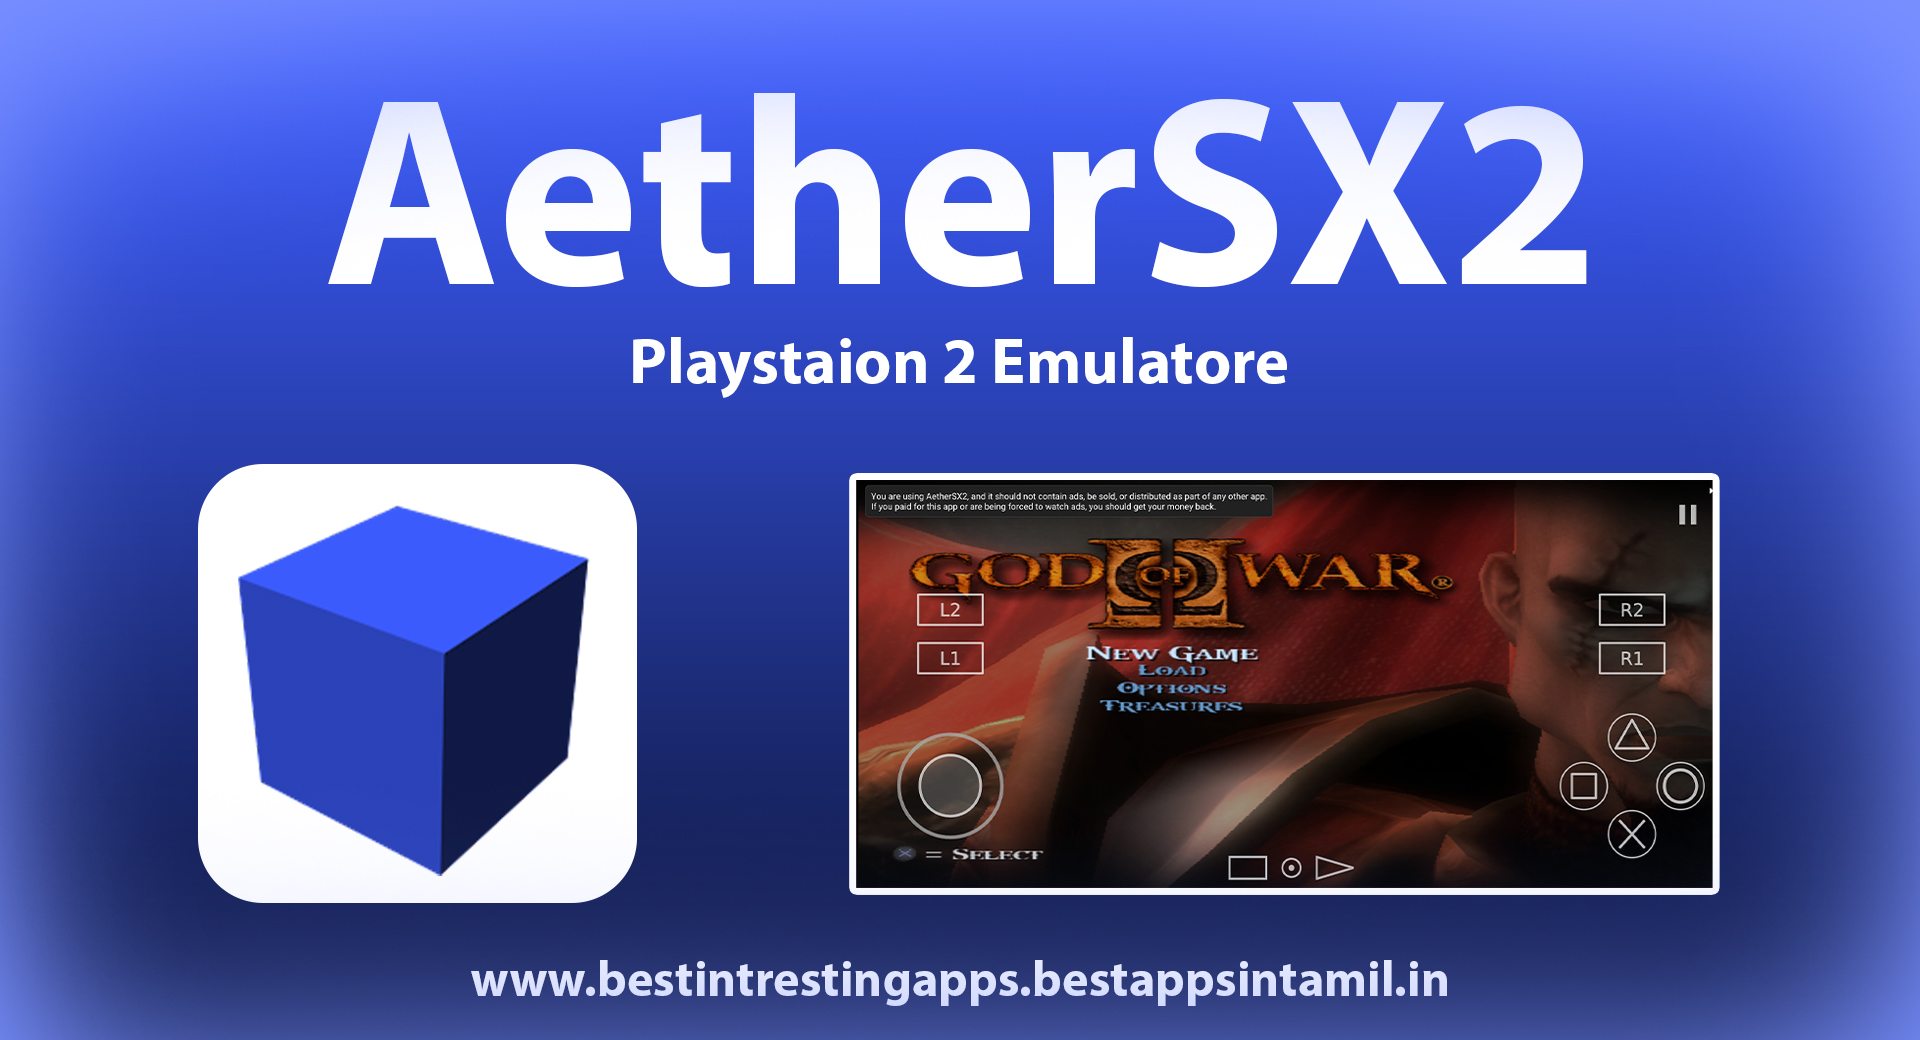 aethersx2 ps2 emulator for android